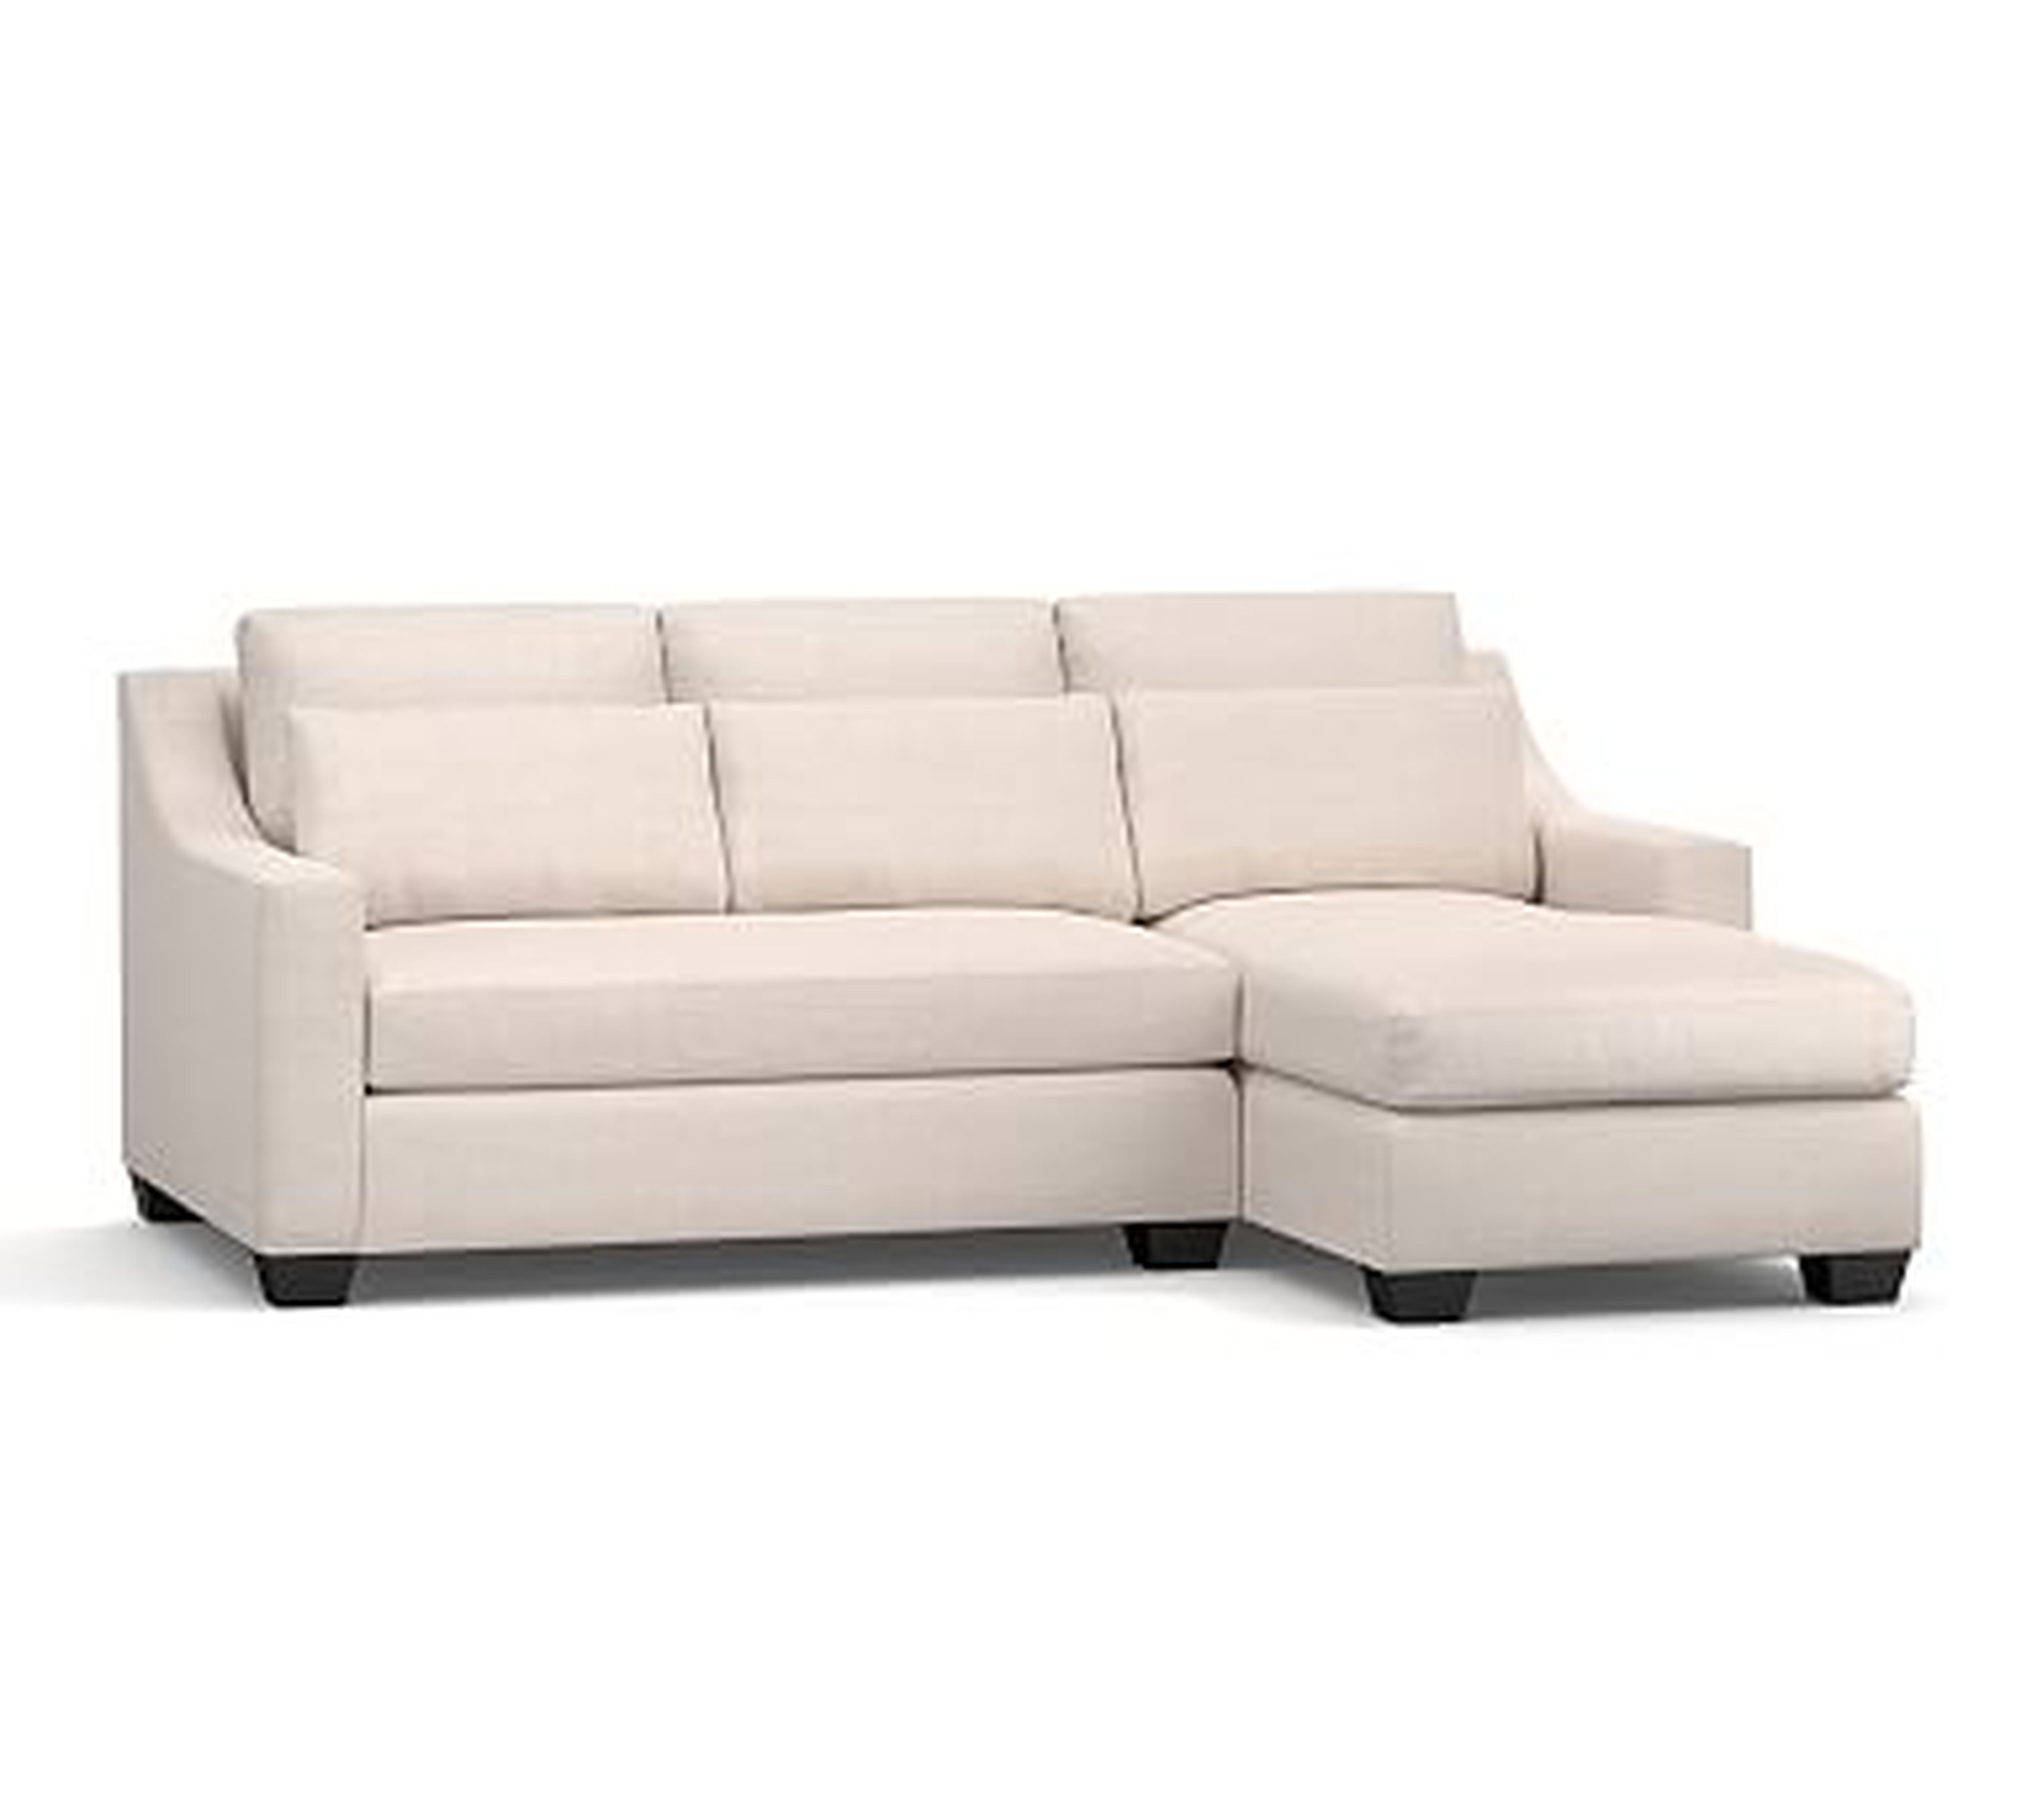 York Slope Arm Upholstered Deep Seat Left Arm Loveseat with Chaise Sectional, Bench Cushion, Down Blend Wrapped Cushions, Sunbrella(R) Performance Slub Tweed White - Pottery Barn